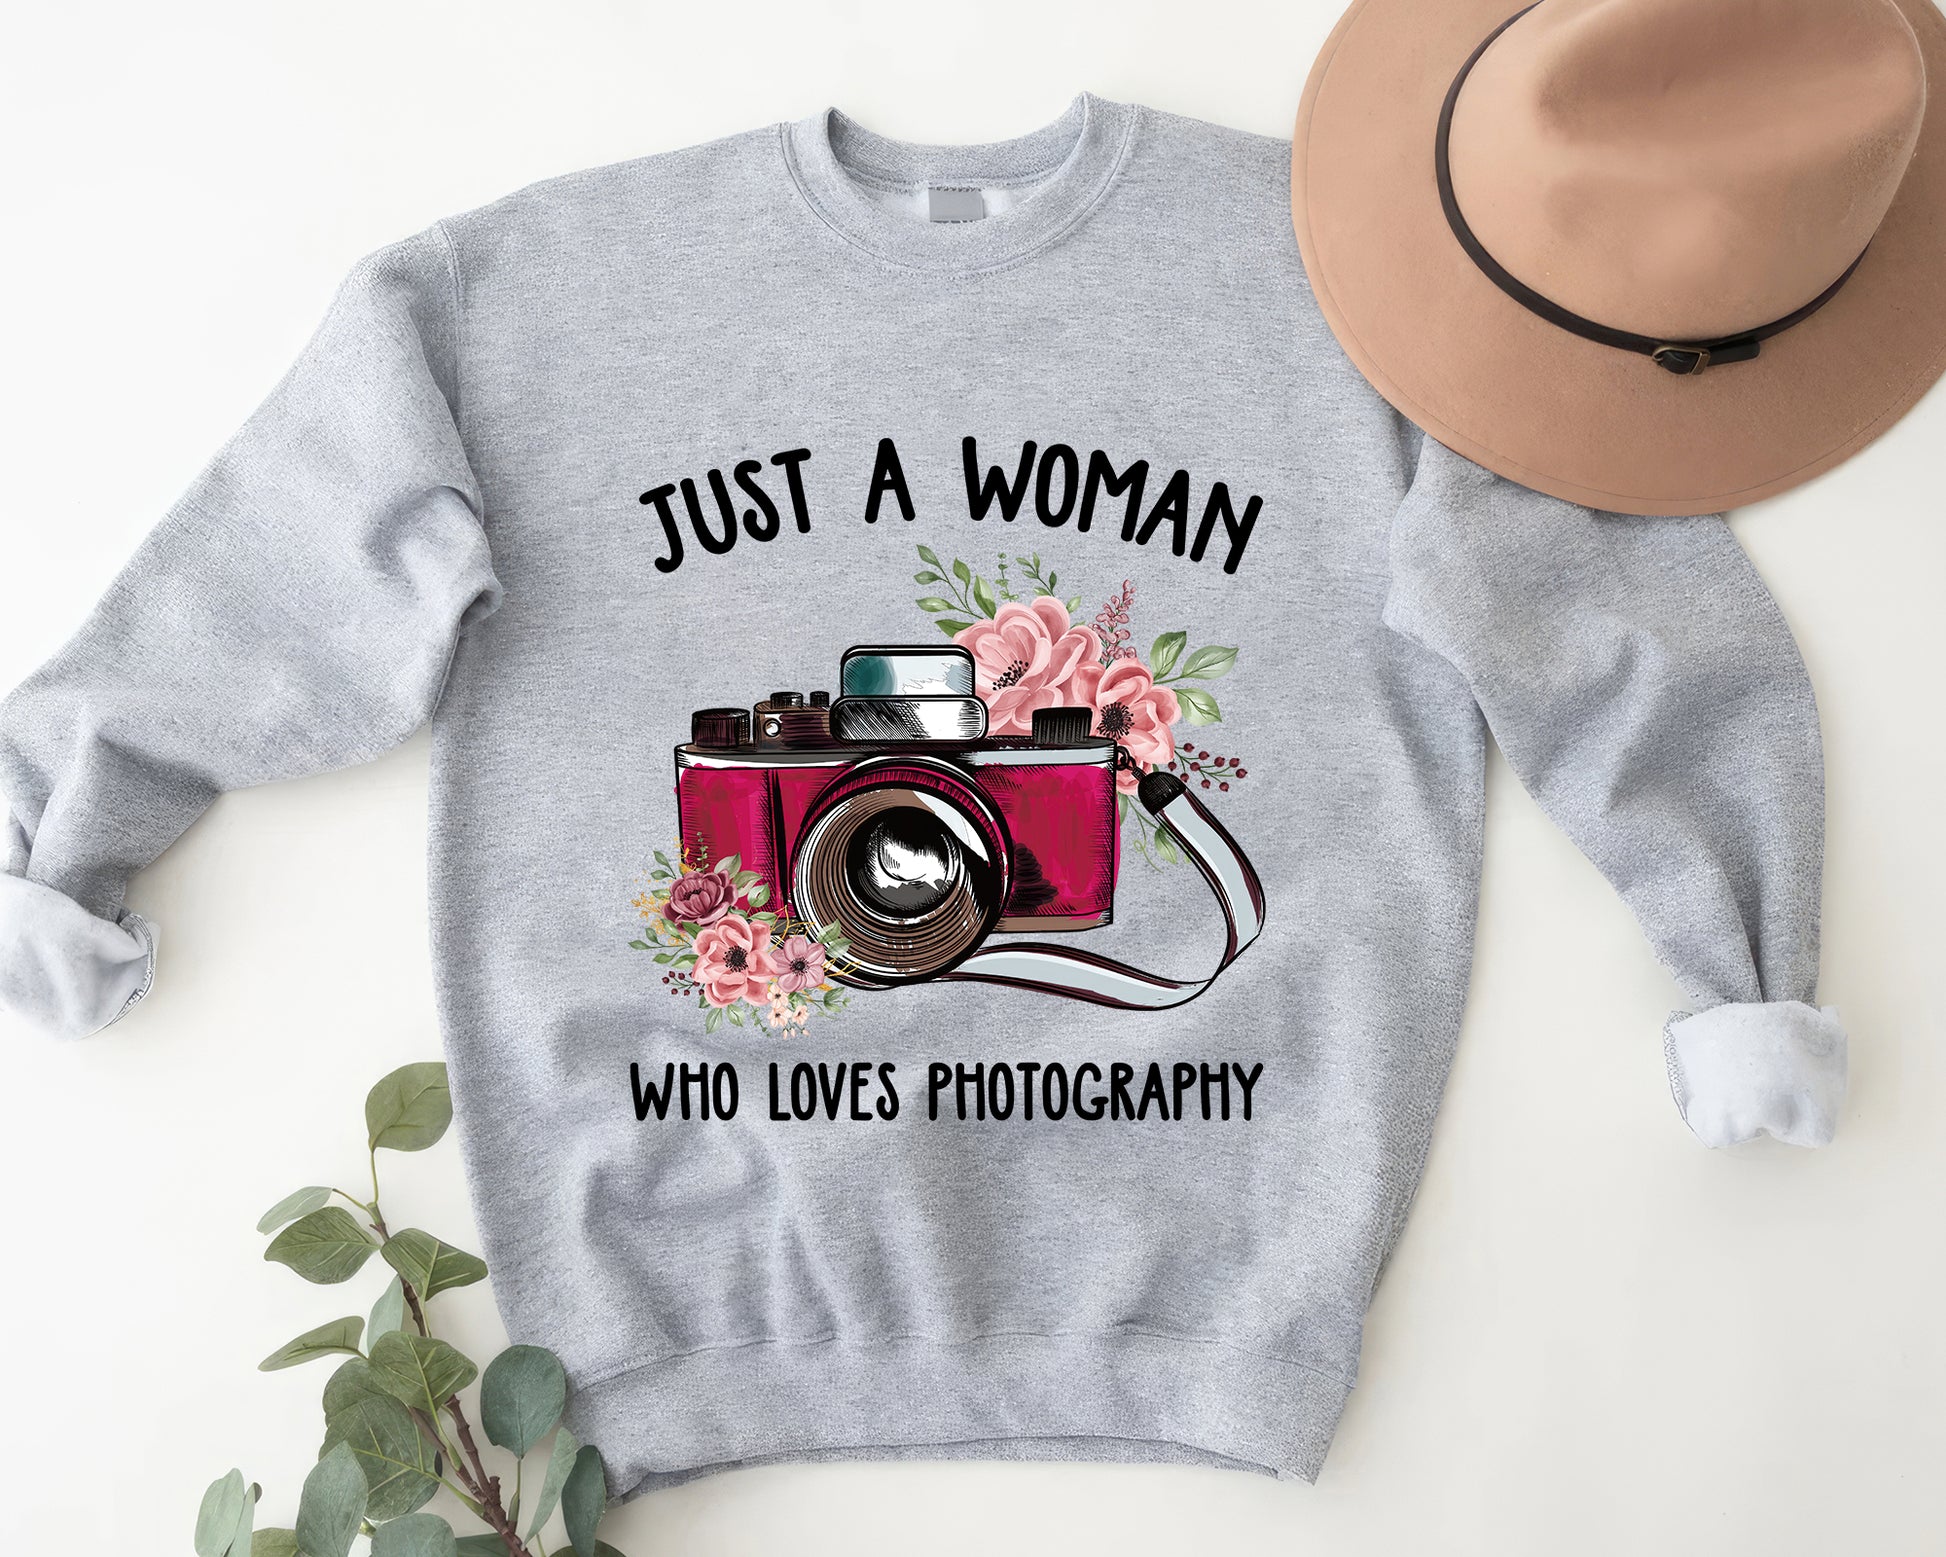 Tee Art Online Just A Woman Who Loves Photography Sweatshirt | Typography Boho Watercolor Floral Cute Photography Girl Design | Floral Bohemian Hippie